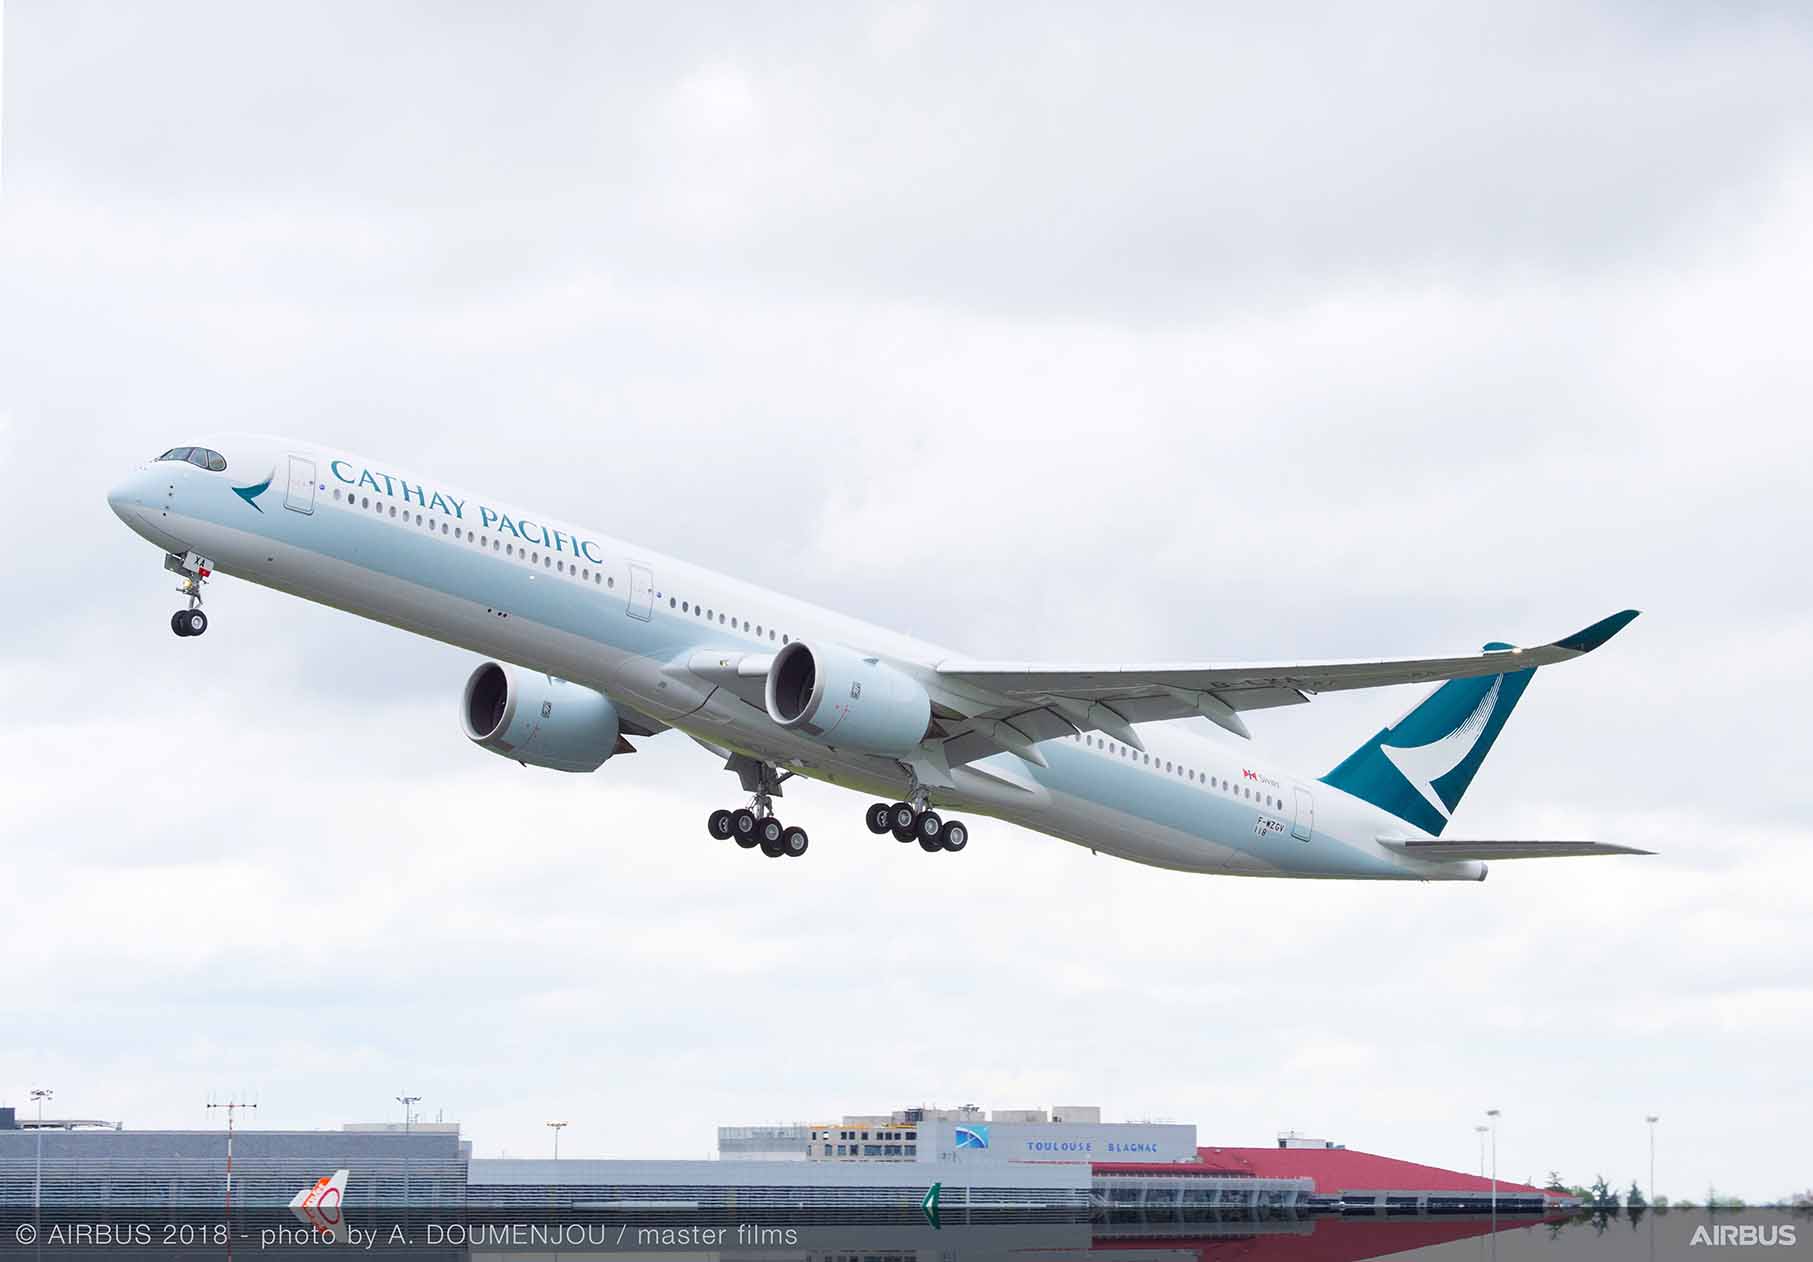 Strong comeback for Cathay Pacific in May 2023, expects consolidated profit in 1H of 2023